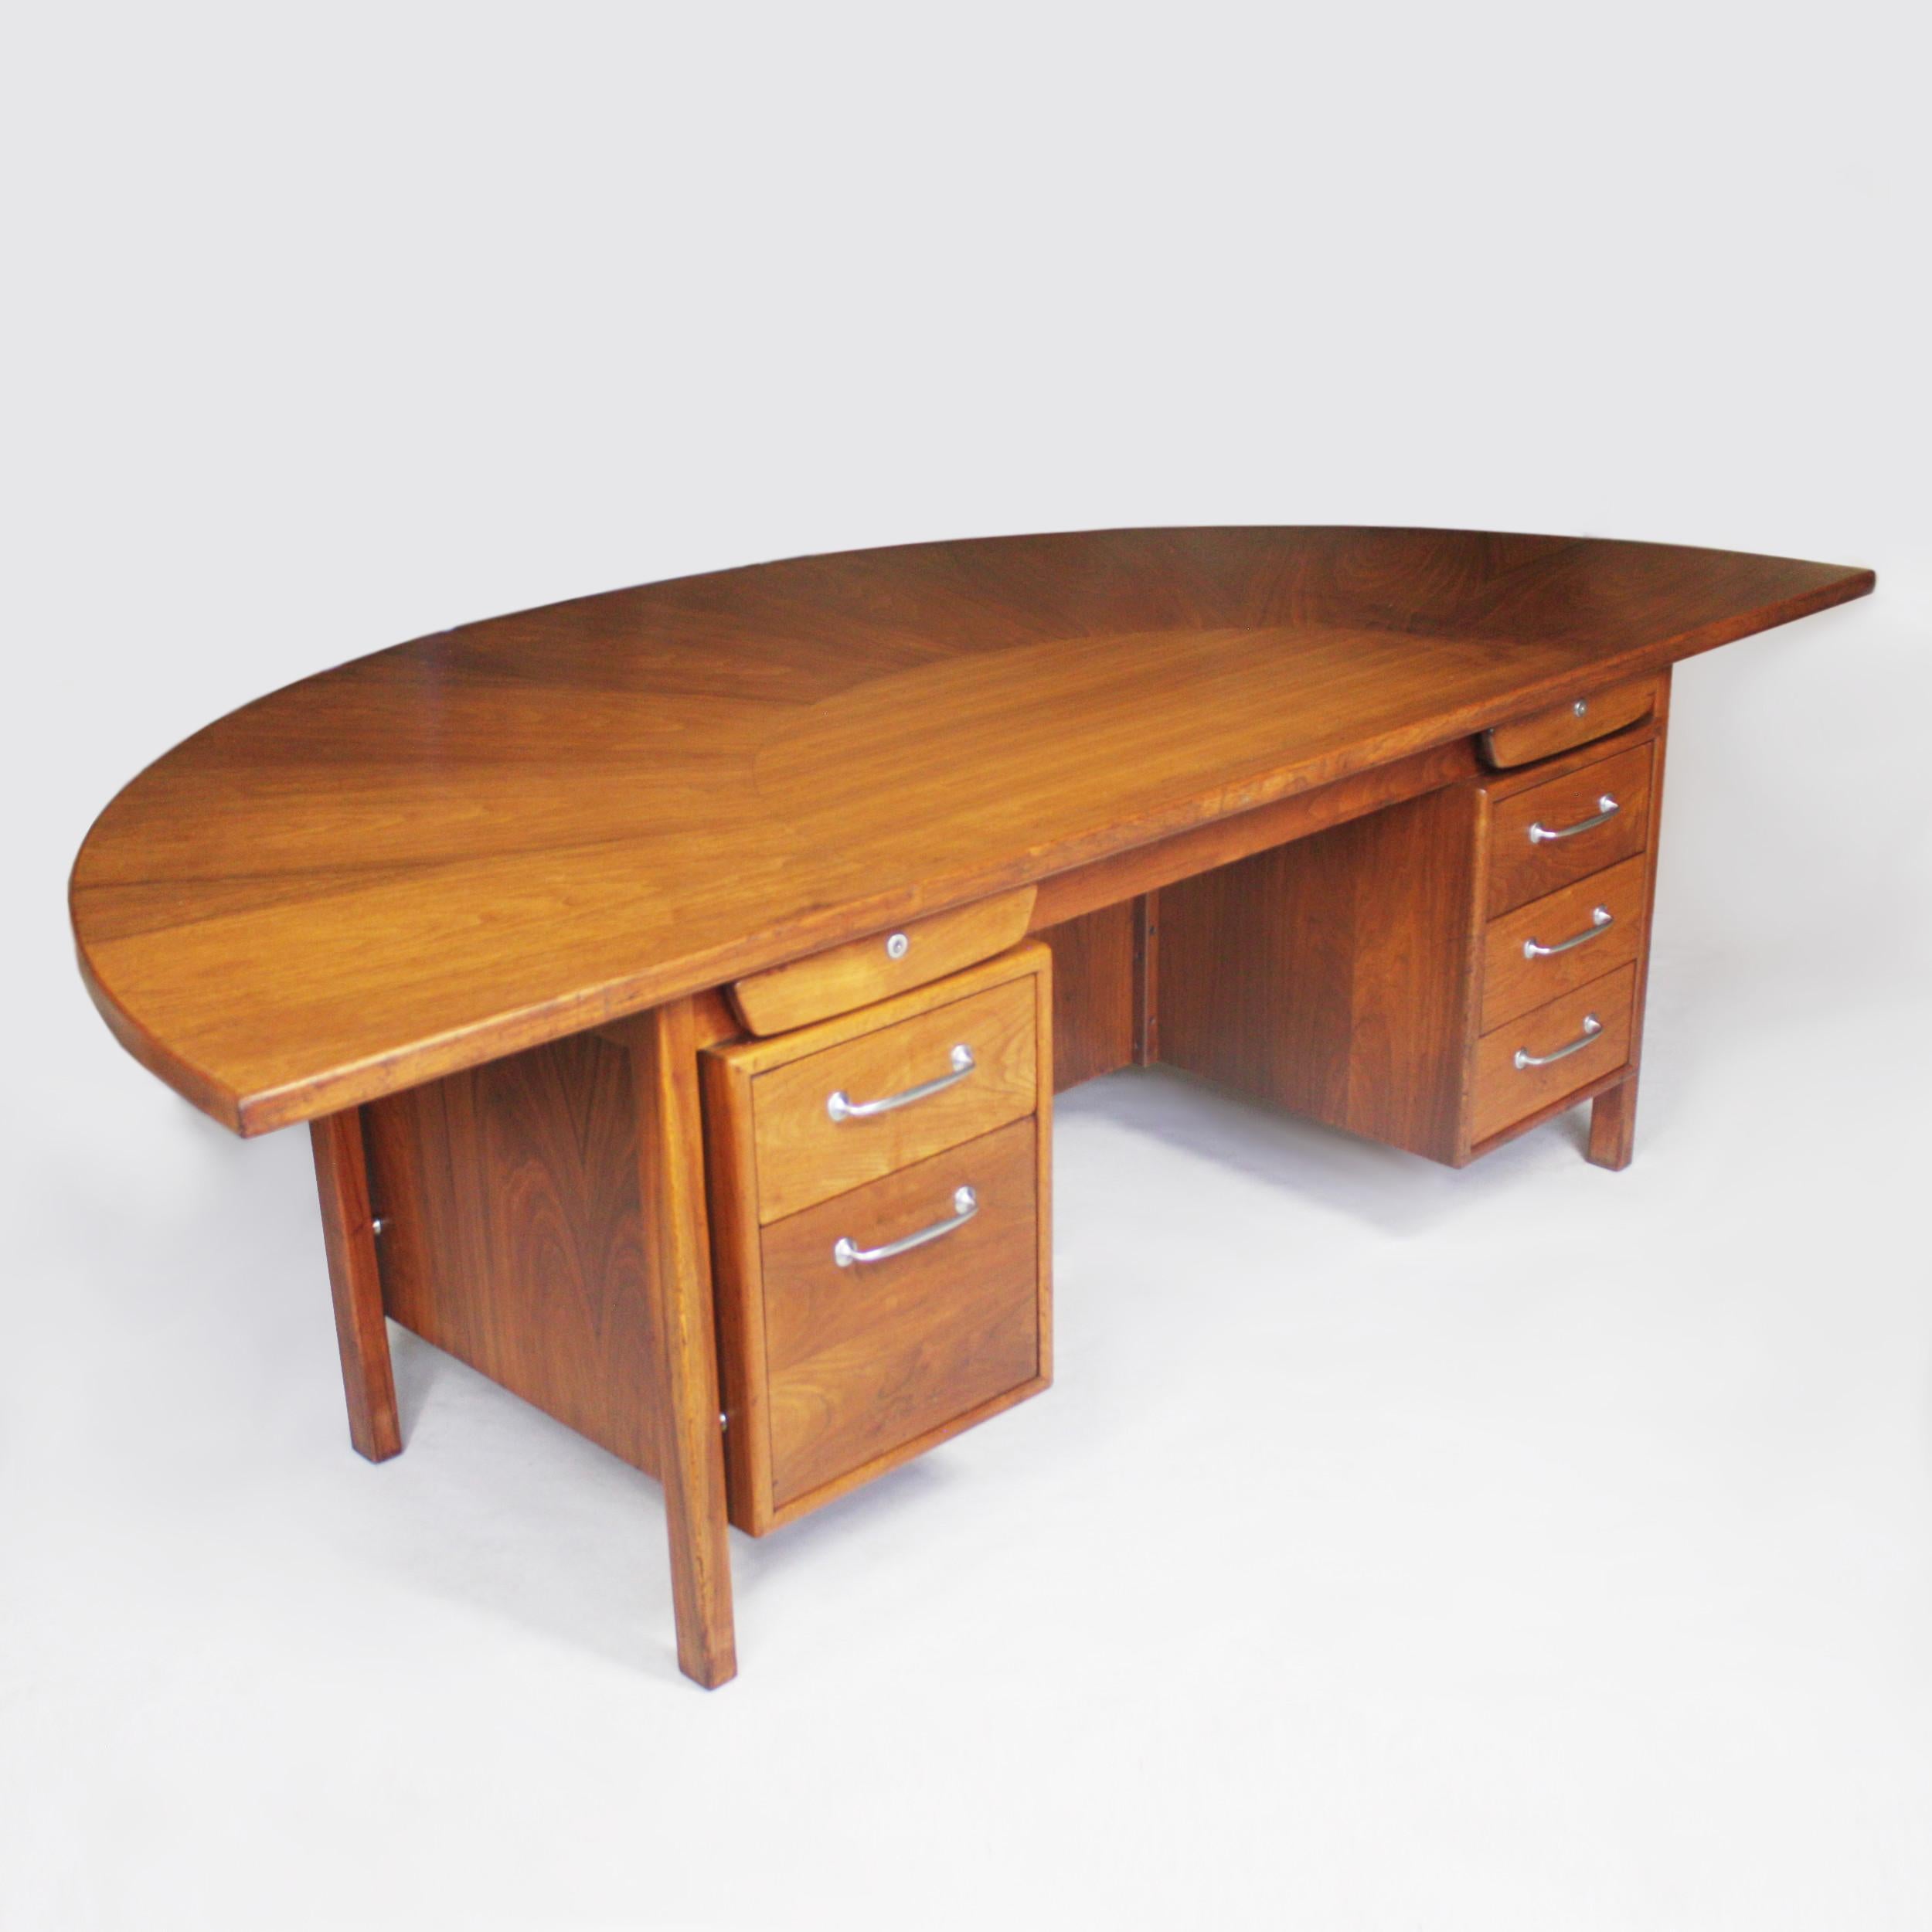 This spectacular Mid-Century Modern executive desk was manufactured by the B.L. Marble and is attributed to designer Jens Risom. Desk features a gorgeous walnut base with unique floating legs and brushed aluminum hardware. However, the Pièce De